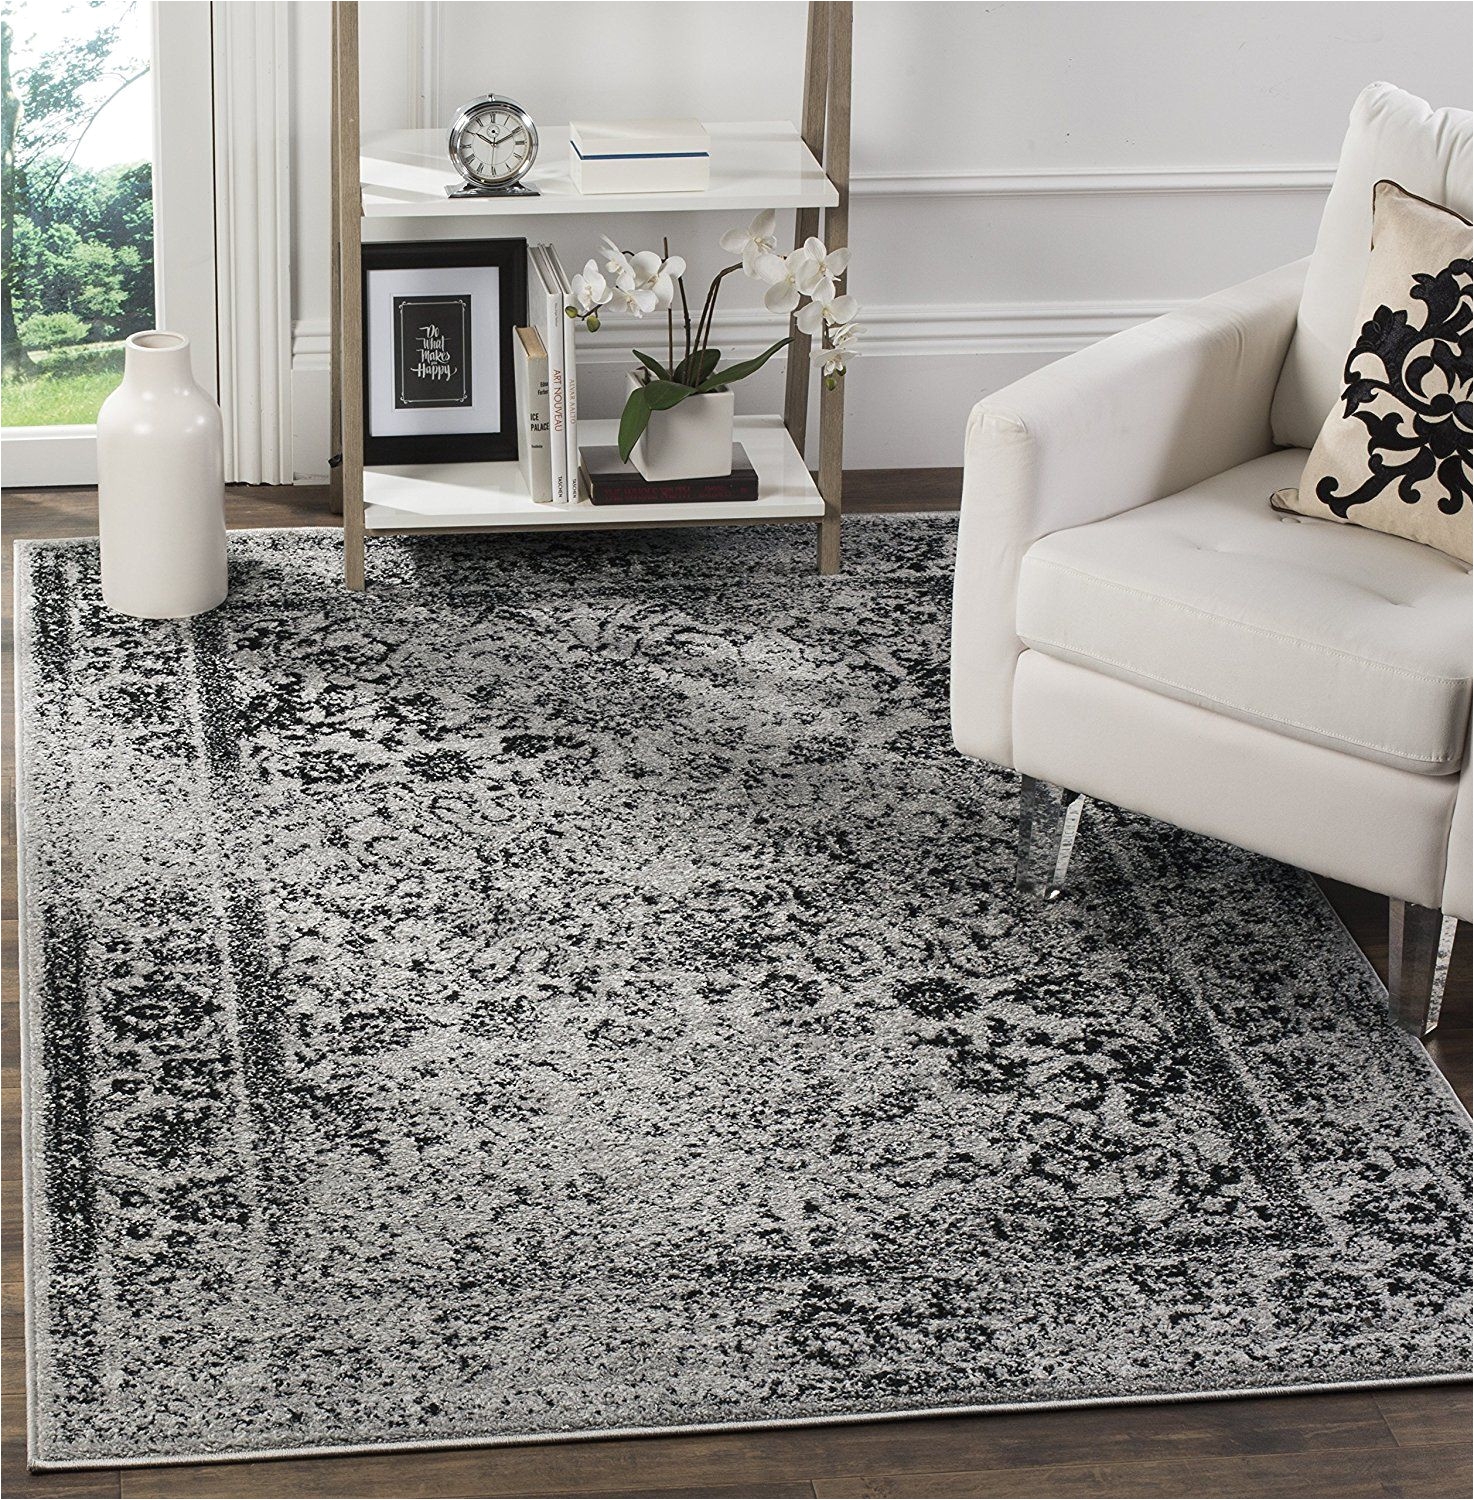 cheap large black area rugs inspirational amazon safavieh adirondack collection adr109b grey and black of cheap